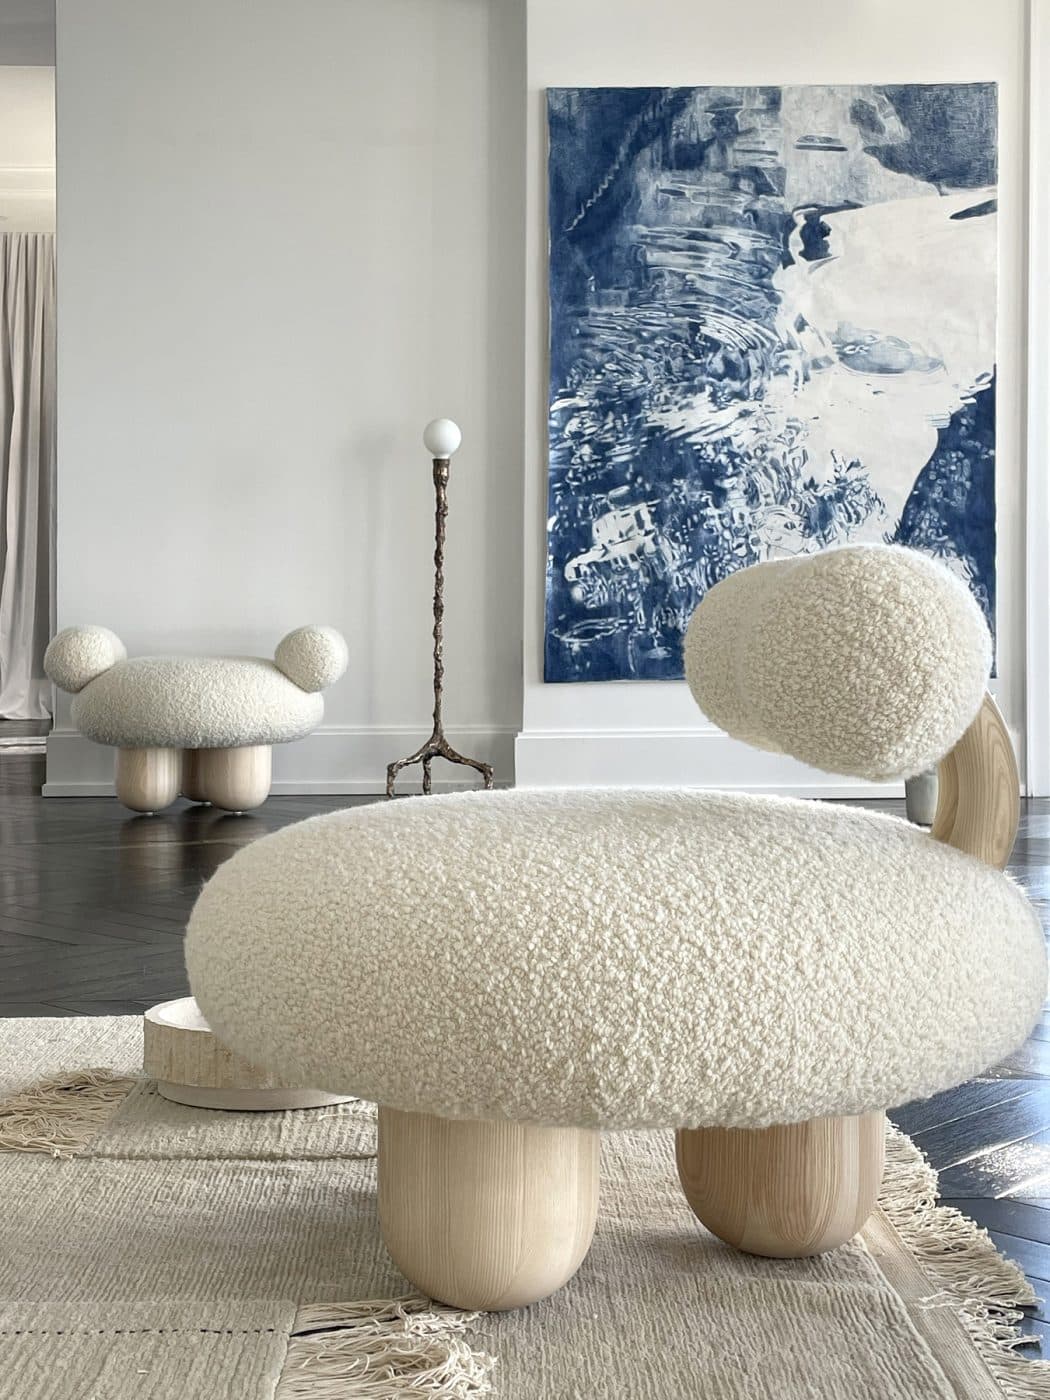 Franceschini's Bling Bling chair and ottoman in the living area of Galerie Philia's staged apartment in New York's Walker Tower